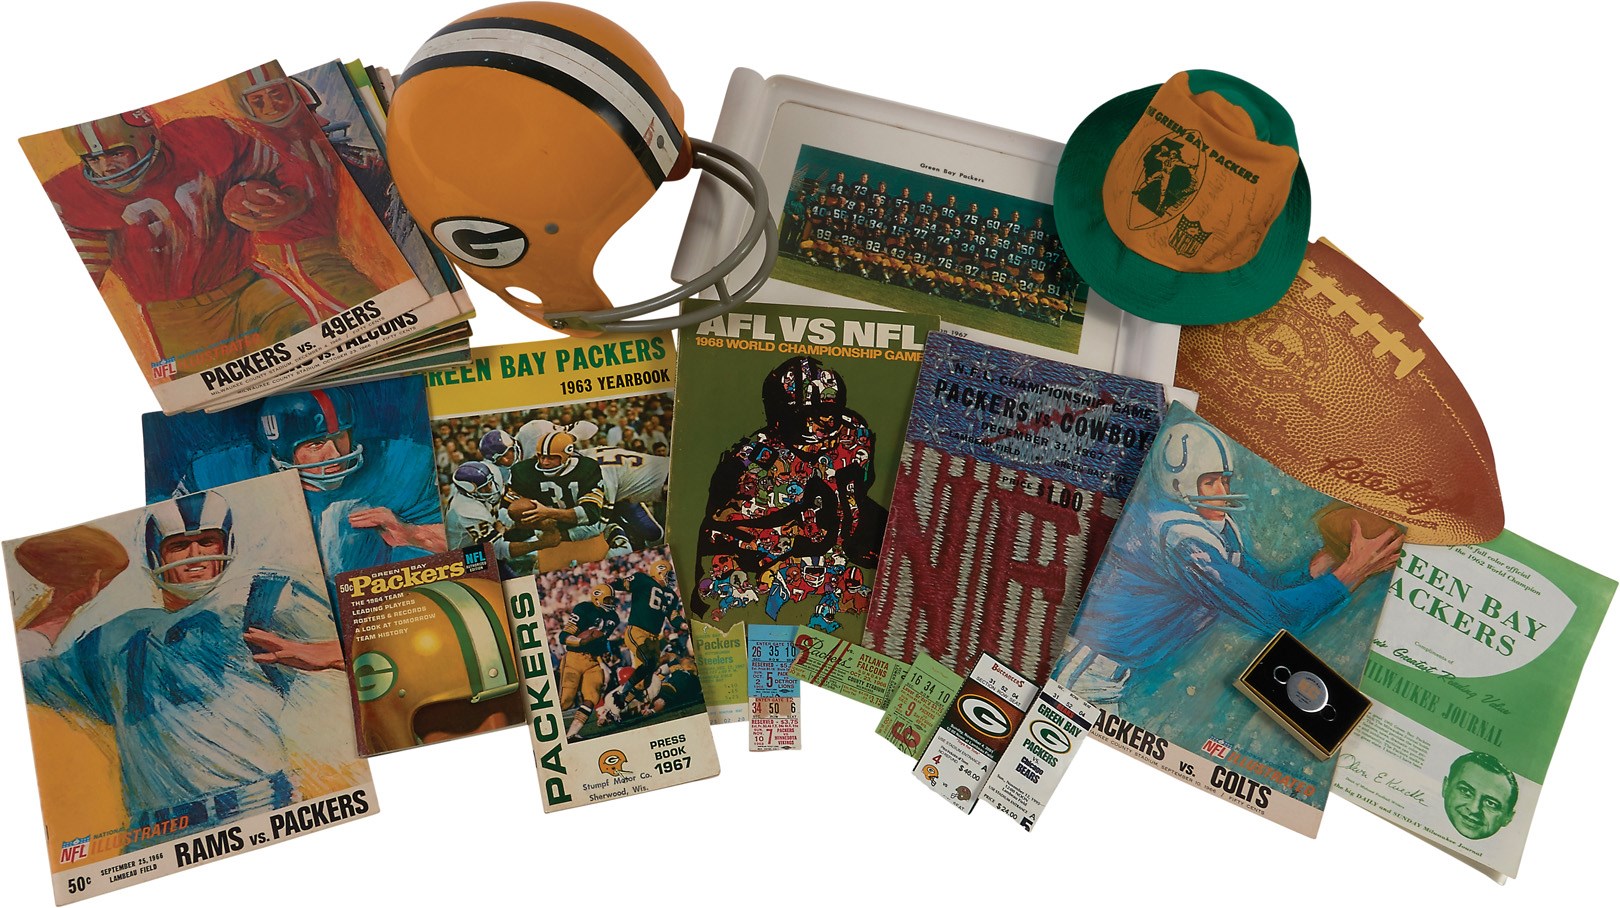 Football - Marvelous 1960s Green Bay Packers Autographs & Publications (40)